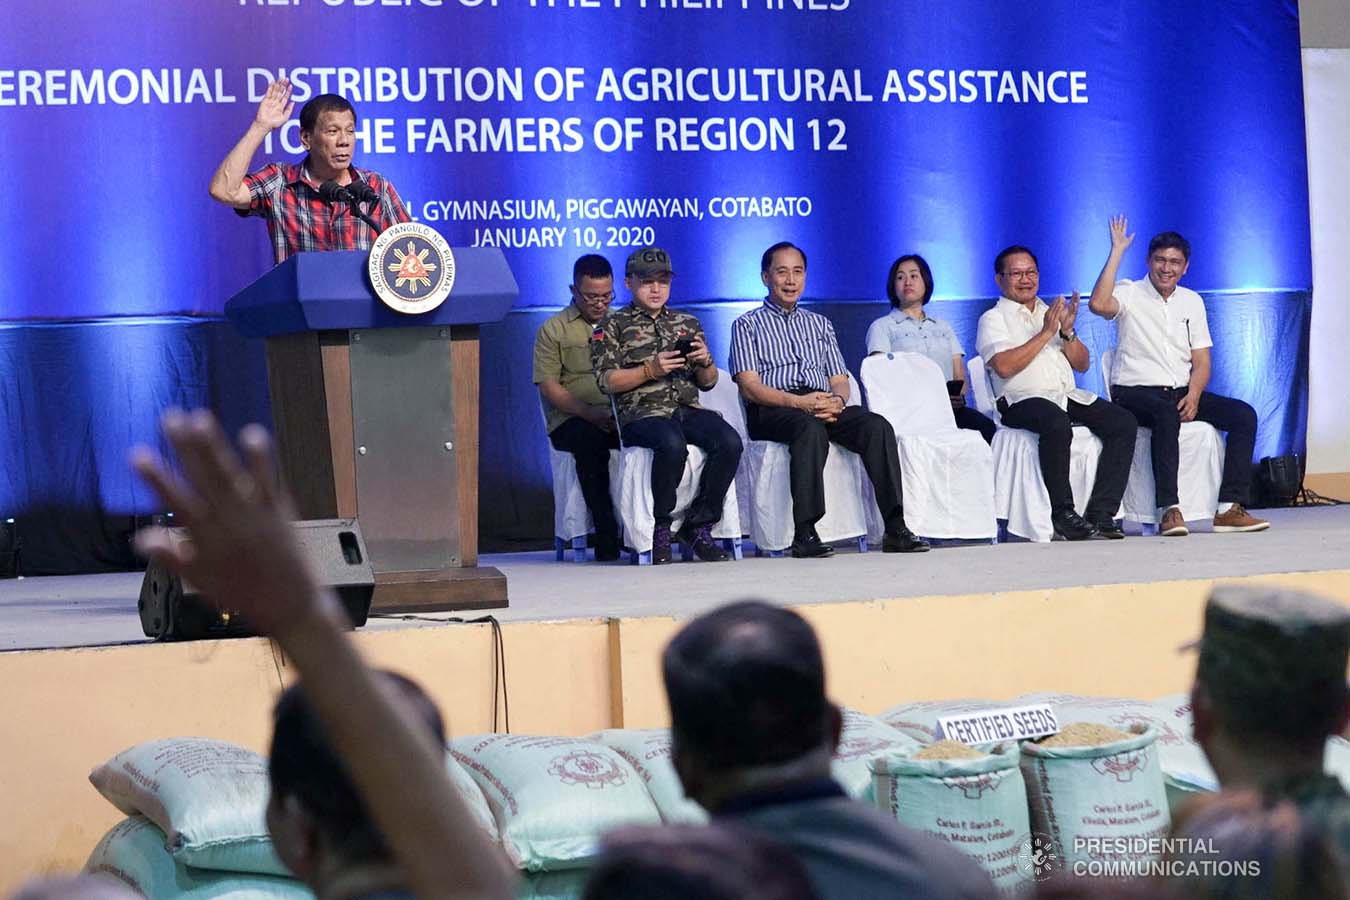 President Rodrigo Roa Duterte delivers a speech during the ceremonial distribution of agricultural assistance to farmers of Region 12 at the Pigcawayan Municipal Gymnasium in Cotabato on January 10, 2020. With the President are Senator Christopher "Bong" Go and Agriculture Secretary William Dar. ARMAN BAYLON/PRESIDENTIAL PHOTO